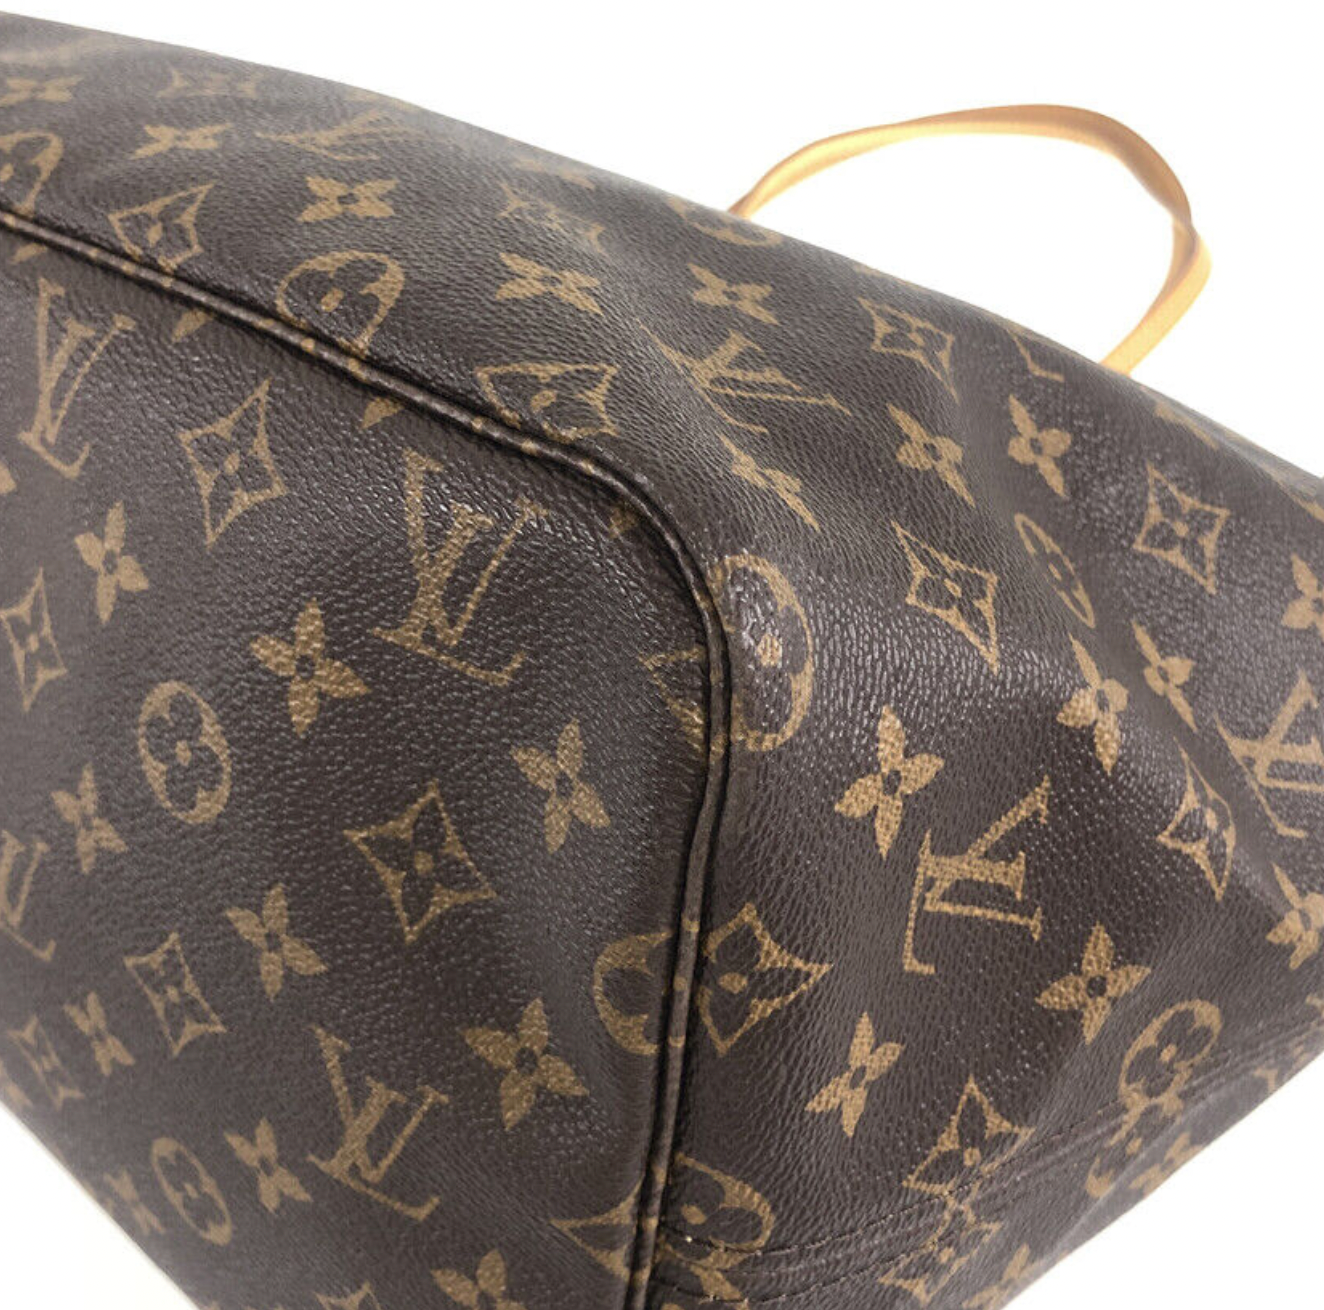 Preloved Louis Vuitton Monogram Neverfull GM Tote Bag TH2037  ***DEAL - $300 OFF